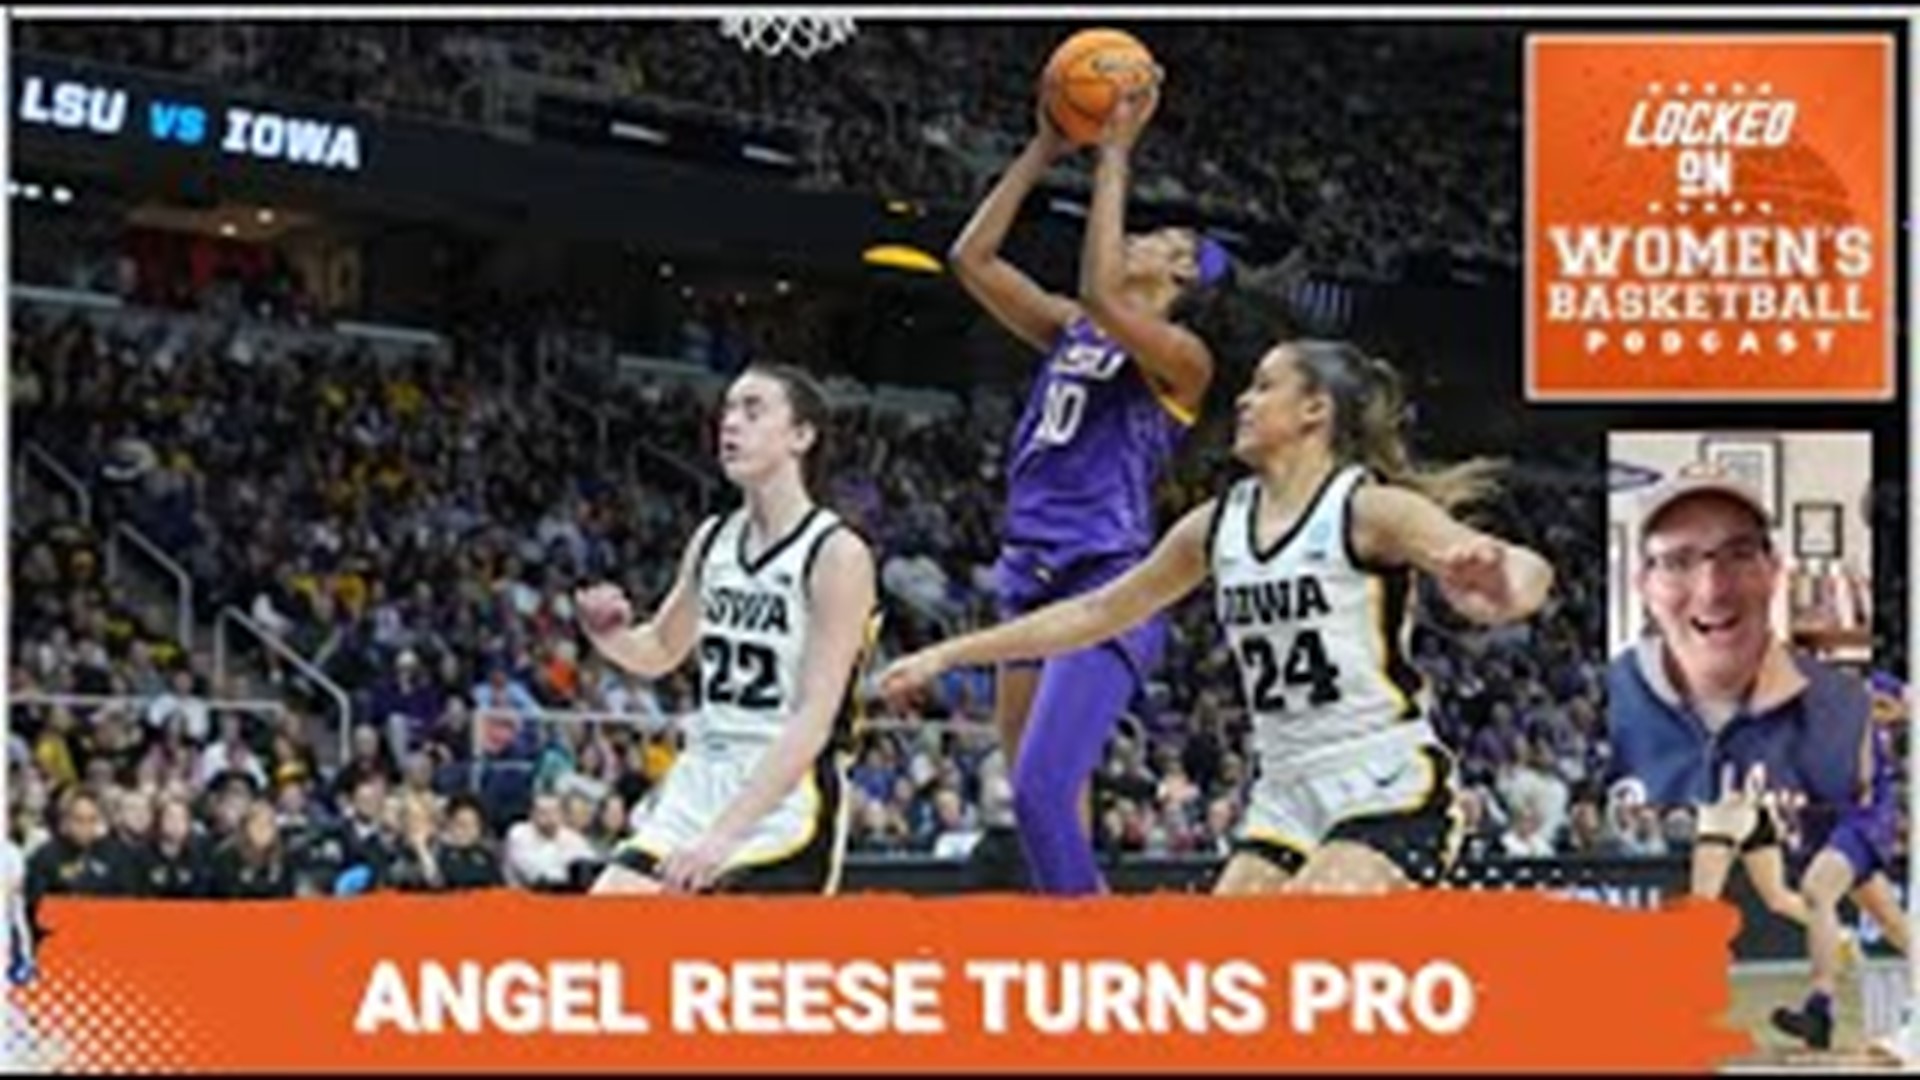 Host Howard Megdal wants to make sure we don't lose sight of all Angel Reese has done and overcome as she makes the leap into the WNBA.